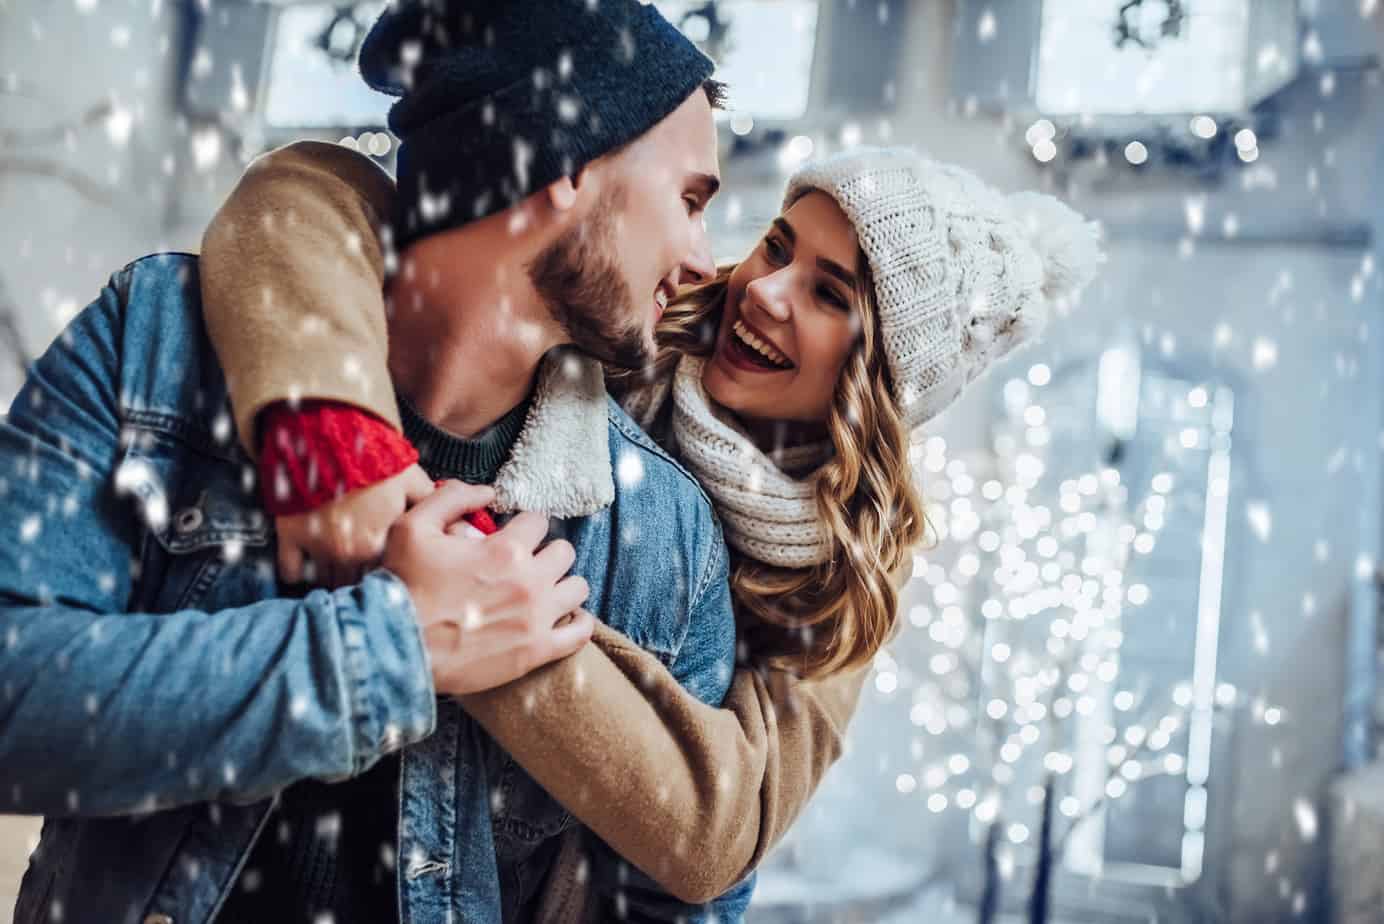 A couple embraces while smiling at each other outdoors in the snow.